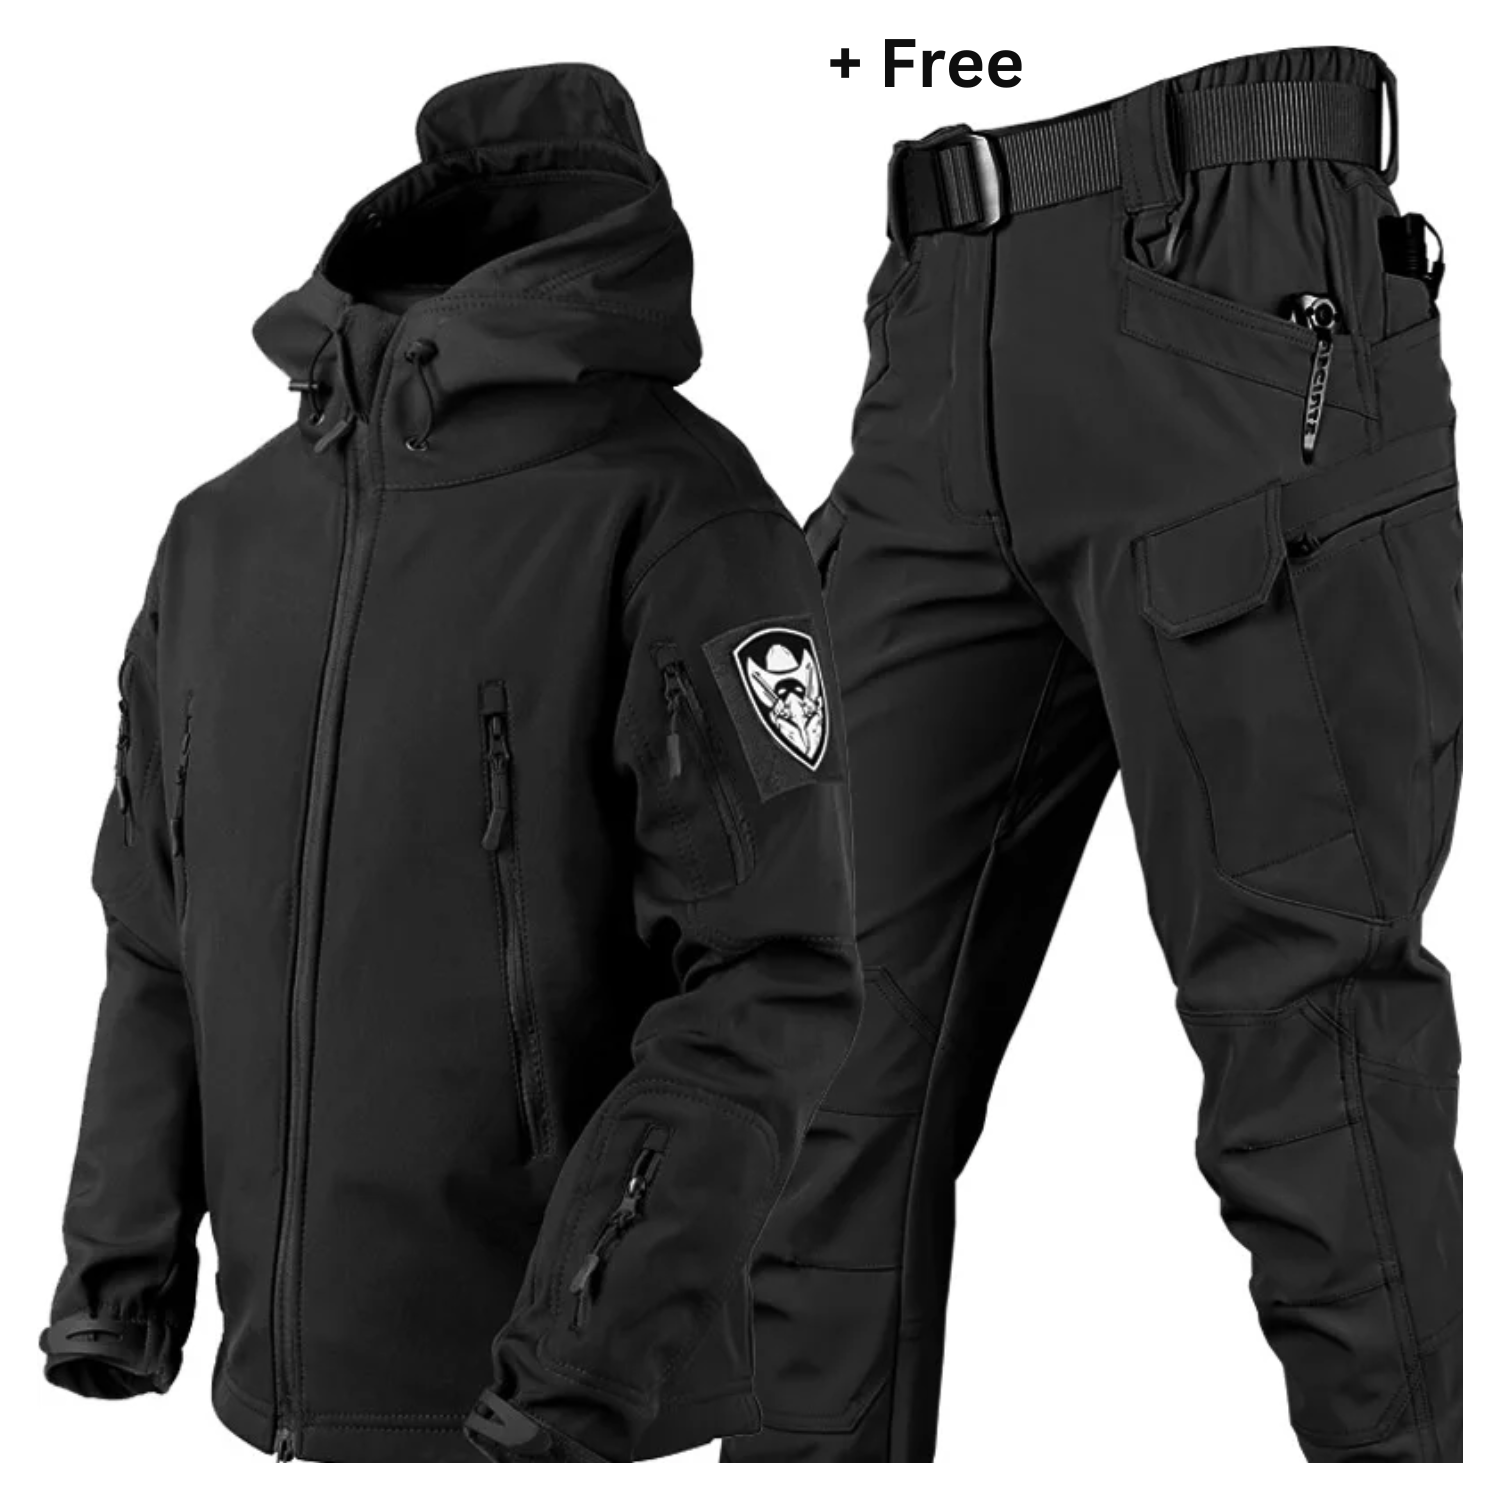 Healthier Life with Allpine™ - Windbreaker Jacket And Free Pants_SaleValour